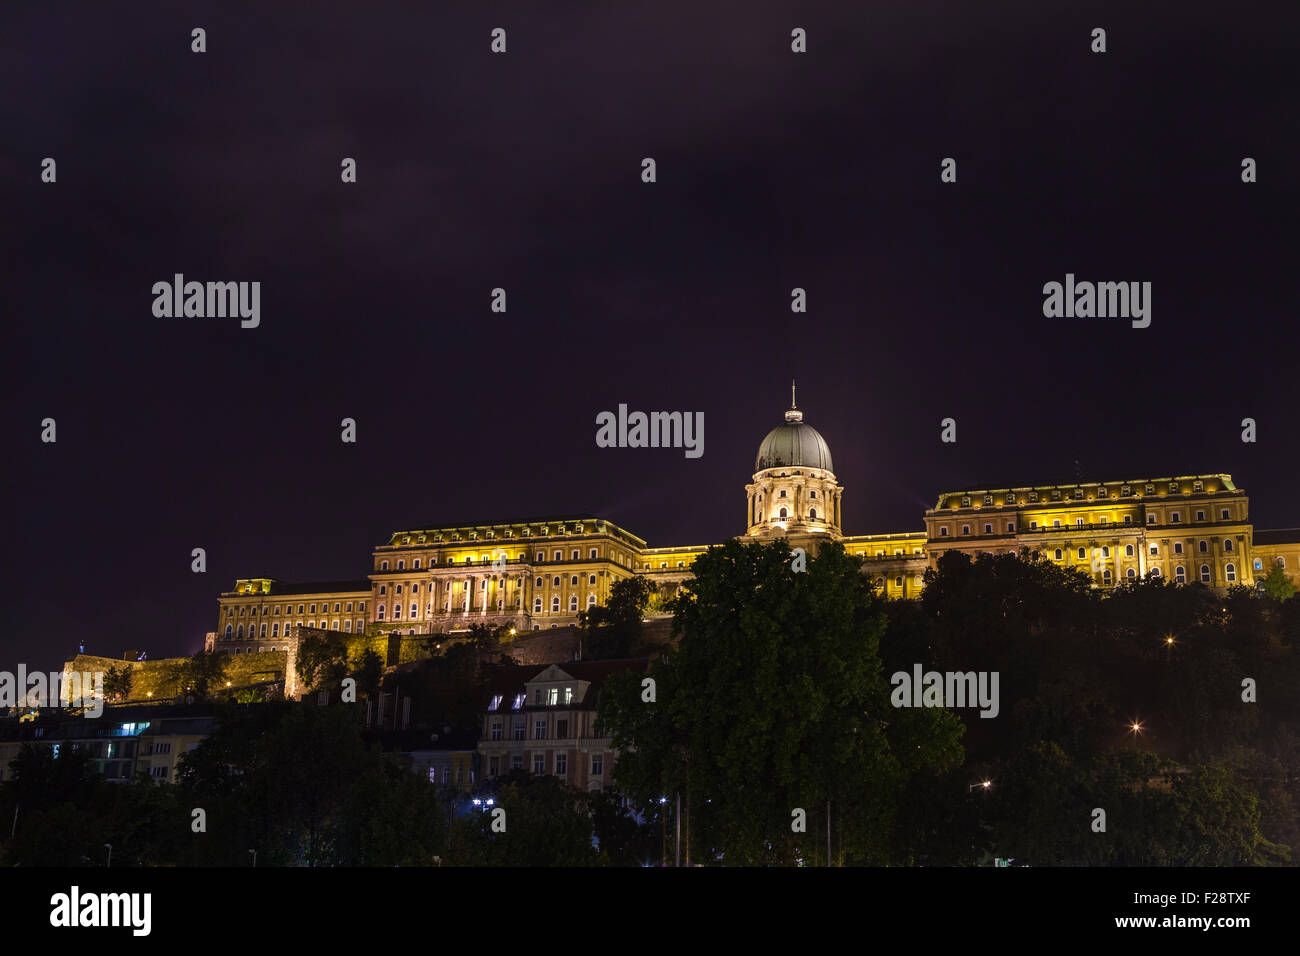 The magnificent Buda Castle at night in Budapest, Hungary. Stock Photo